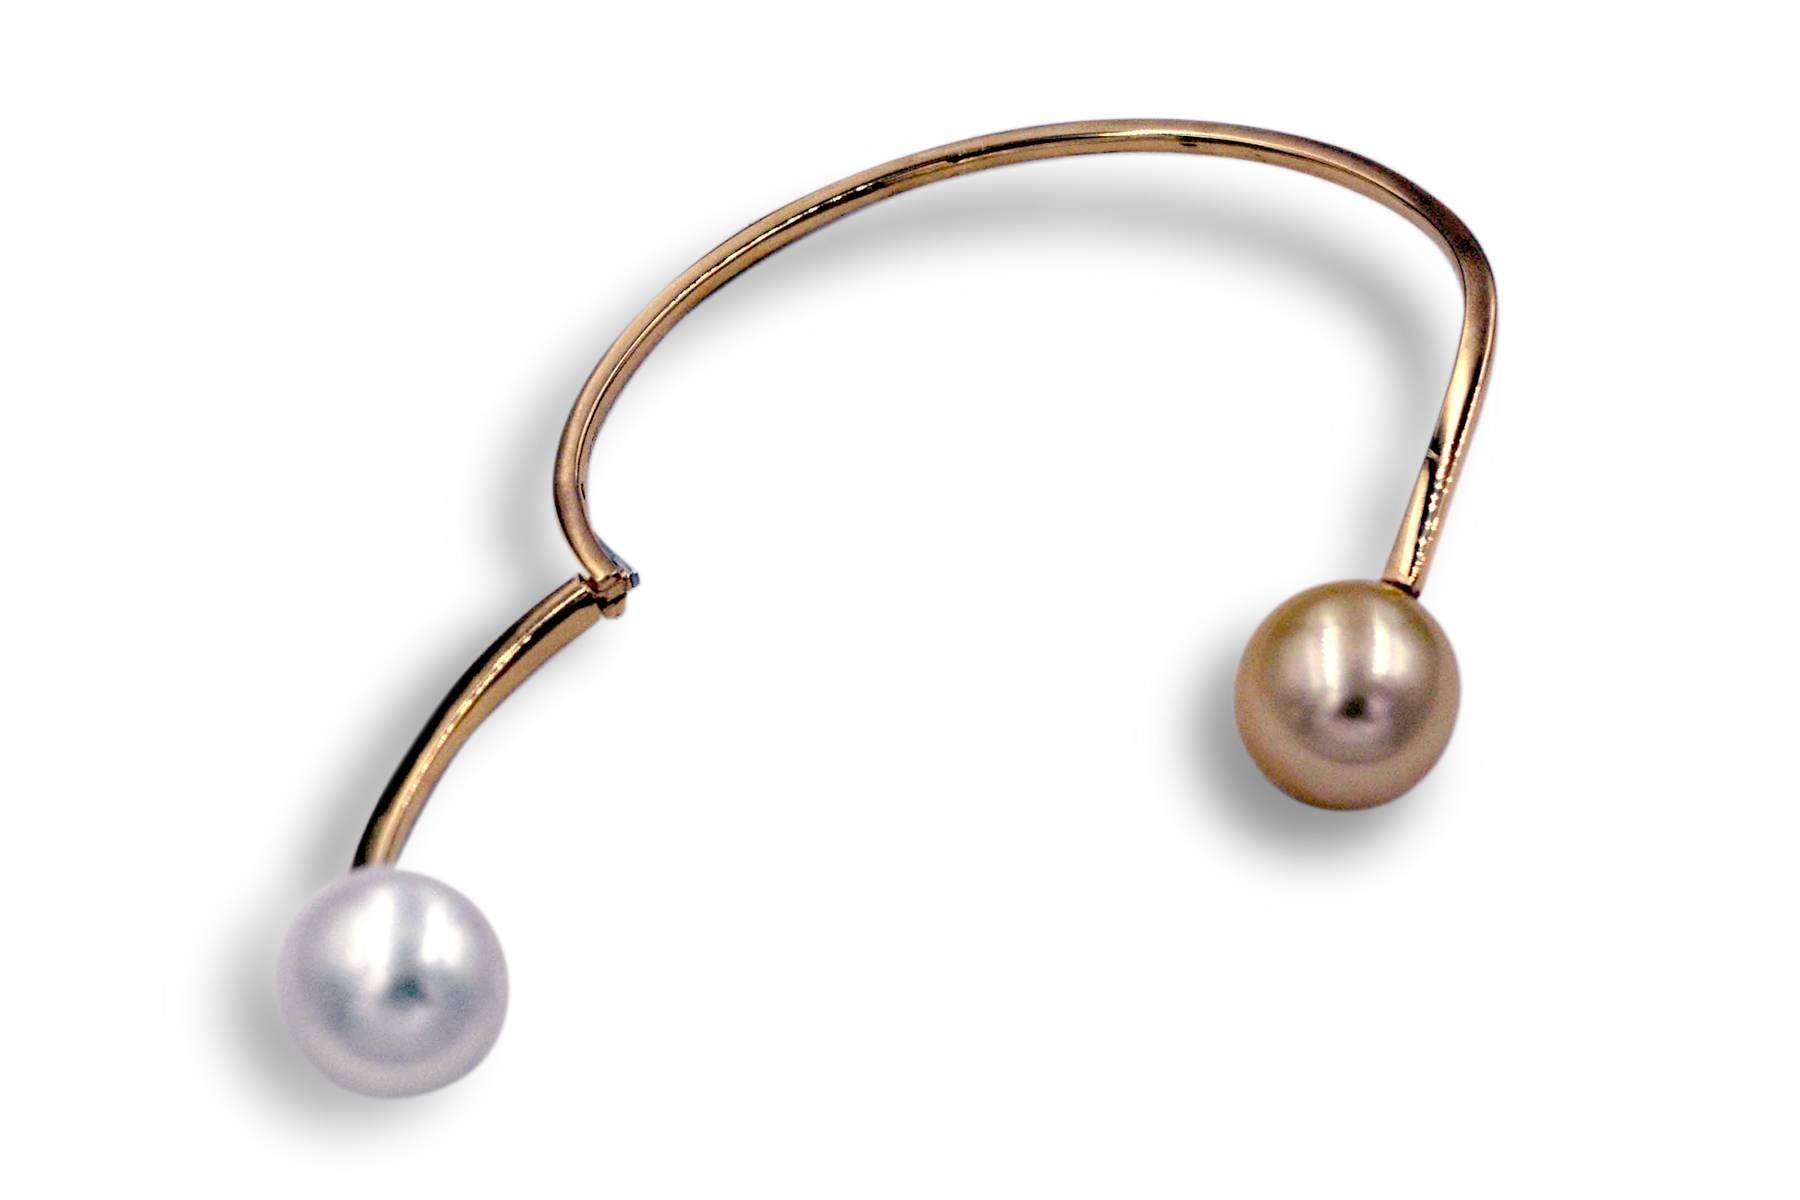 18K Yellow gold bypass bangle featuring one white South Sea & one golden South Sea Pearl measuring 13-14mm.
Gold: 9 Grams

Different Styles Available
Pictures Below